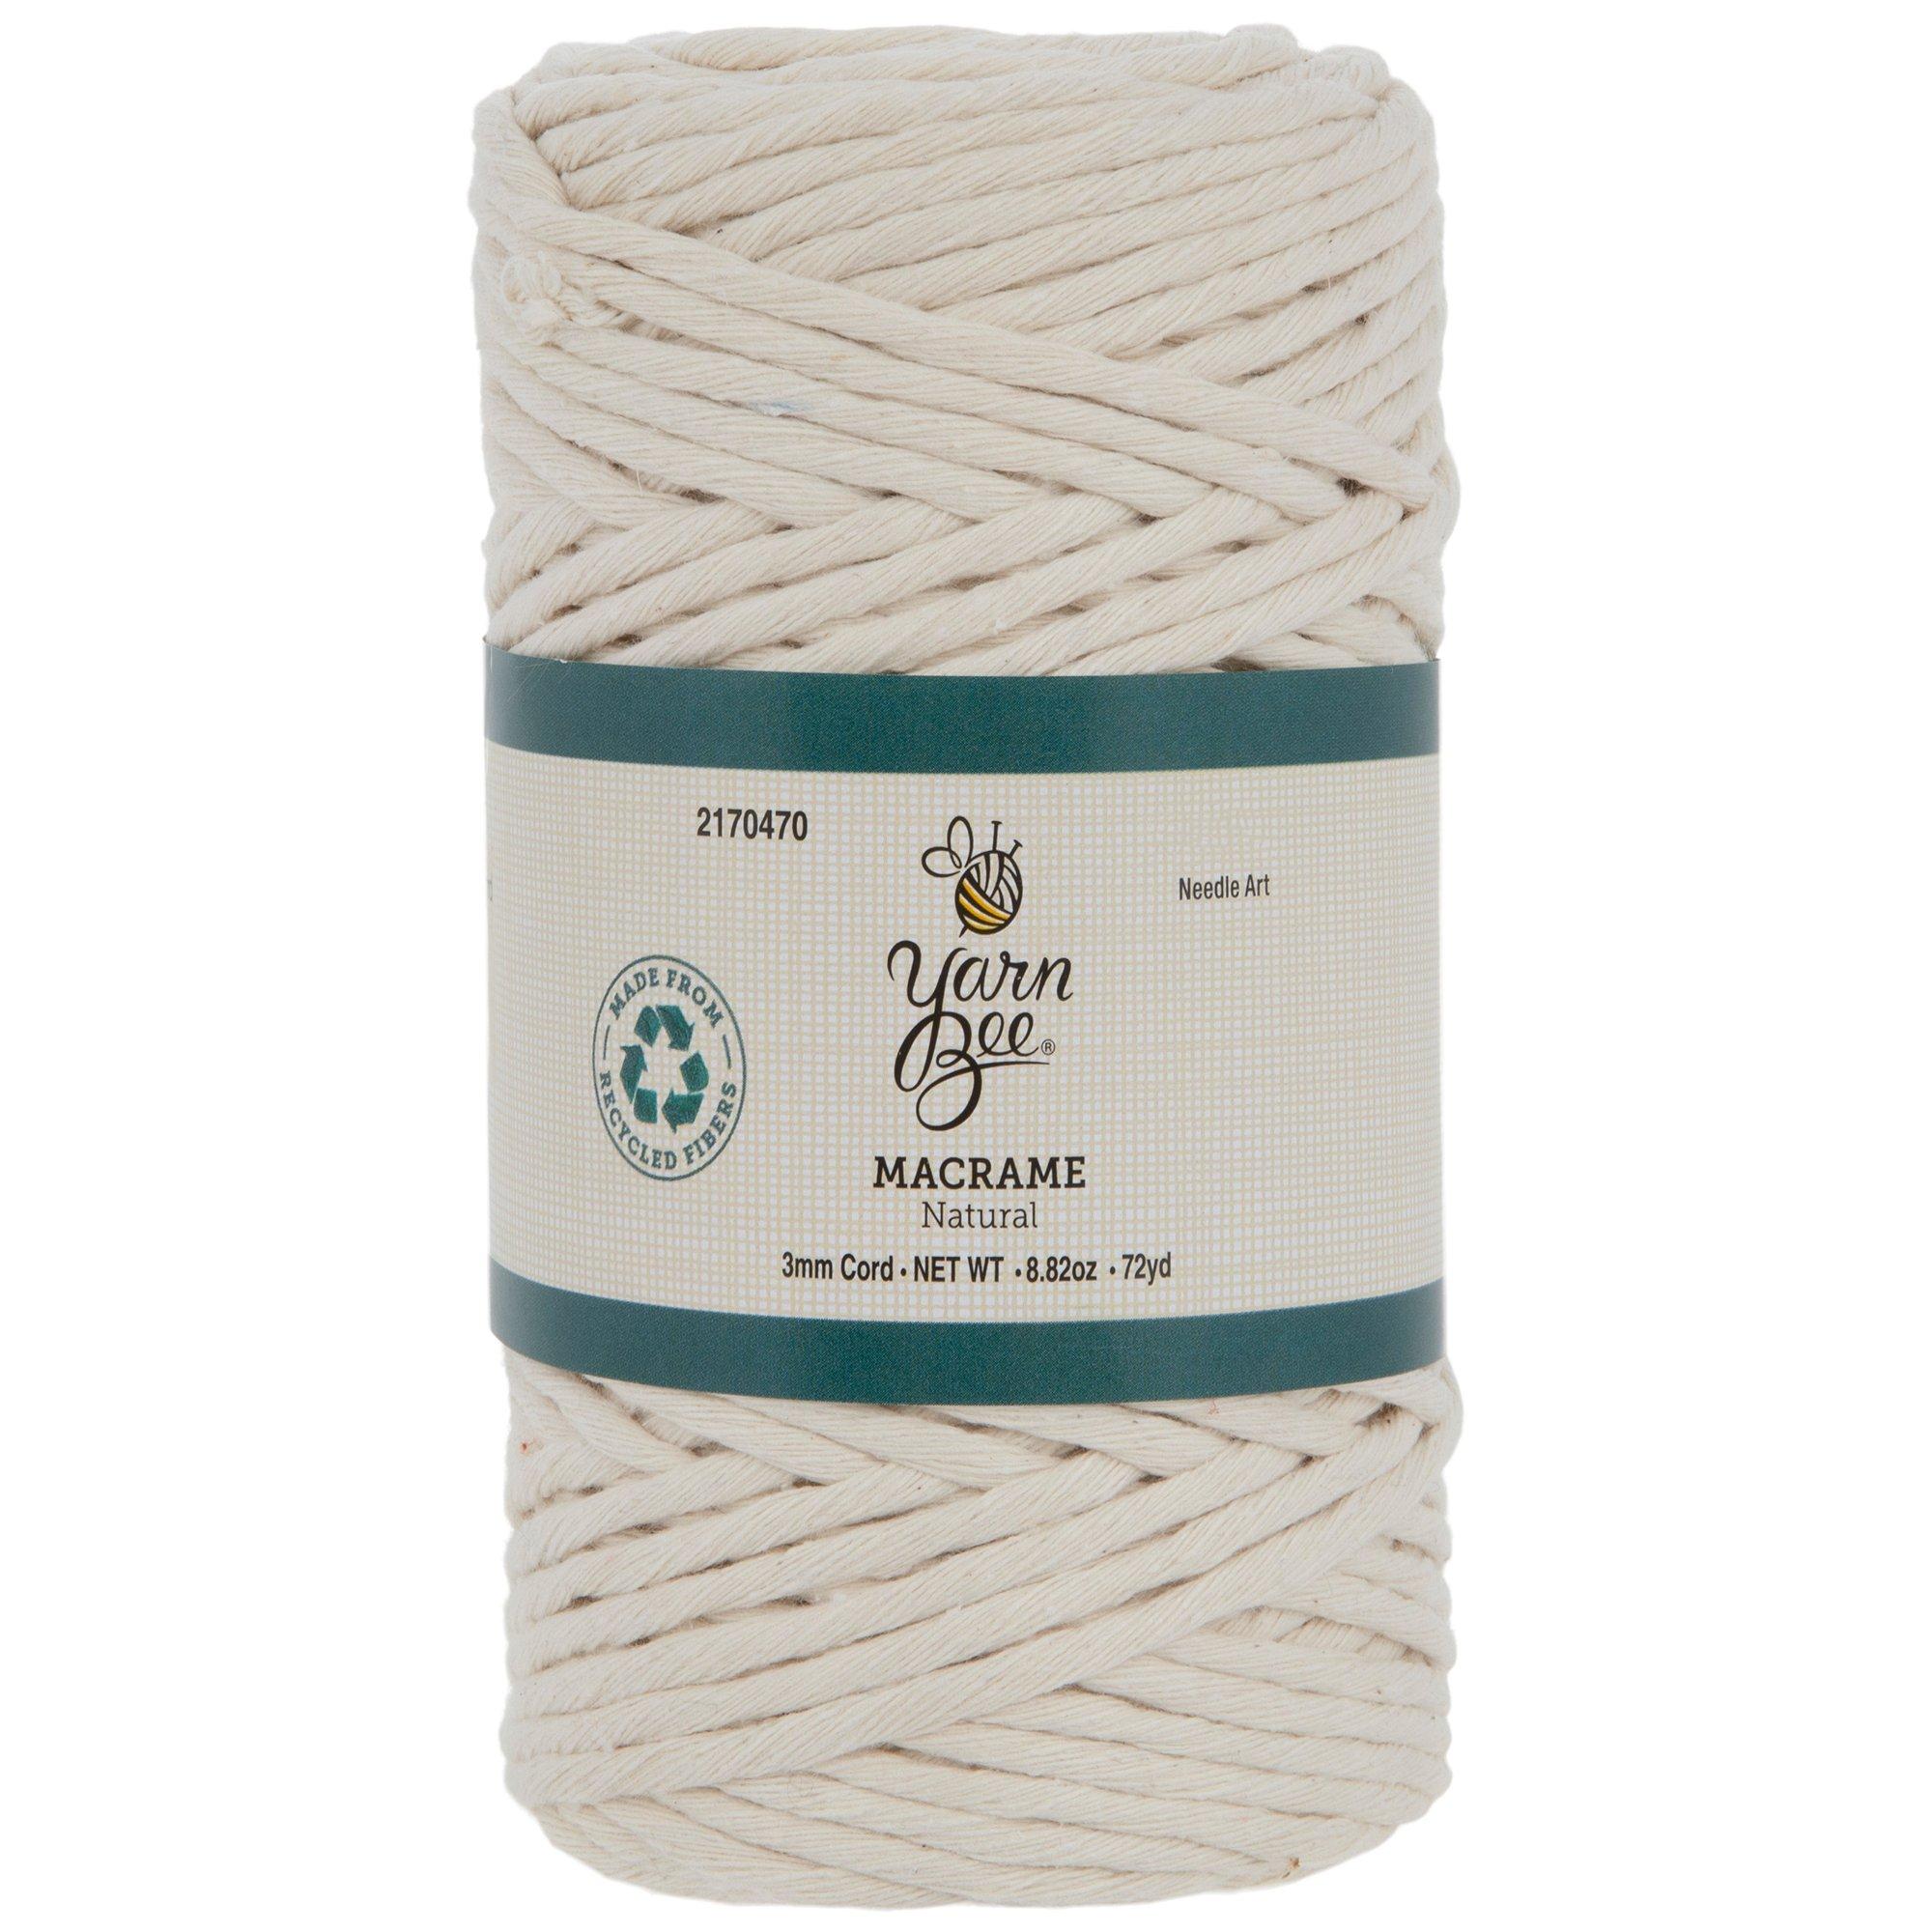 New 6mm Macrame Craft Cord - arts & crafts - by owner - sale - craigslist